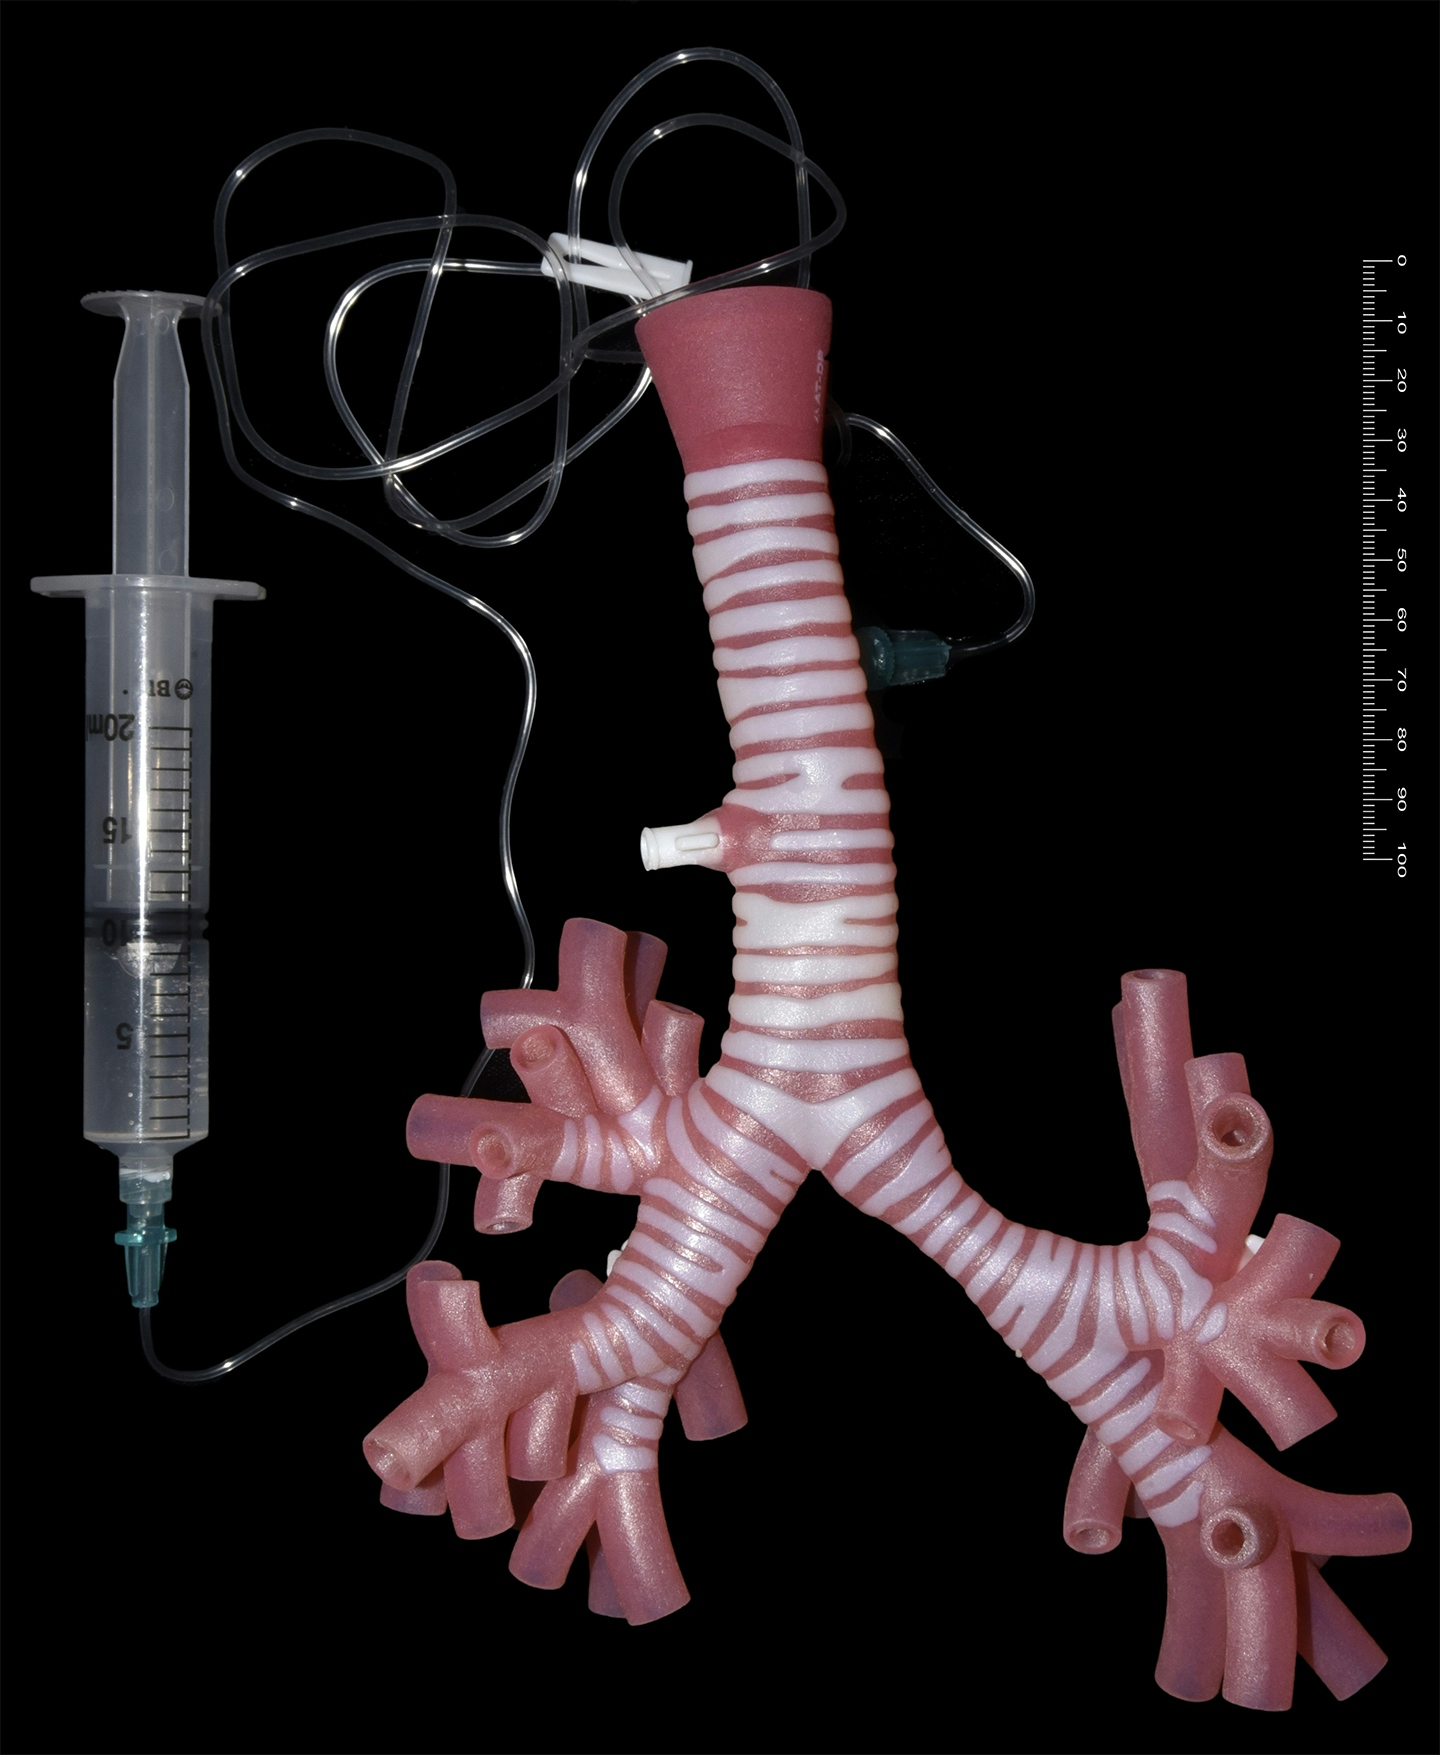 Front view of trachea model attached to syringe with tubing.